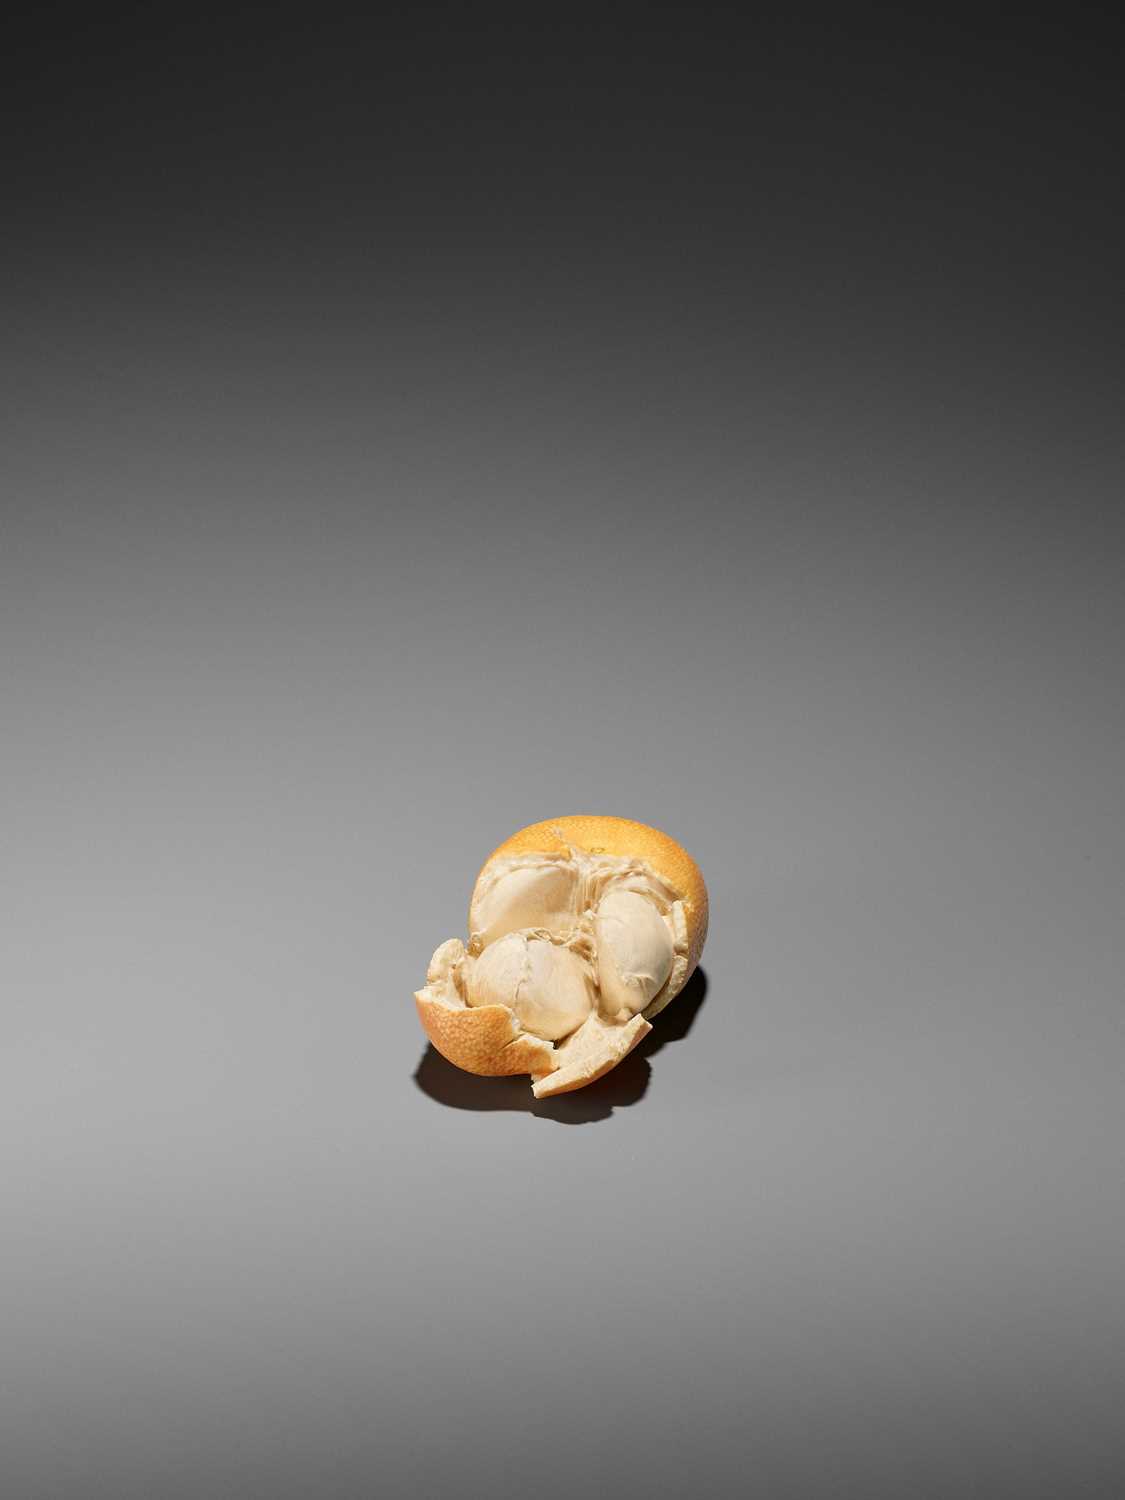 Lot 219 - BISAI: A STAINED IVORY ‘TROMPE-L’OEIL’ OKIMONO OF A TANGERINE